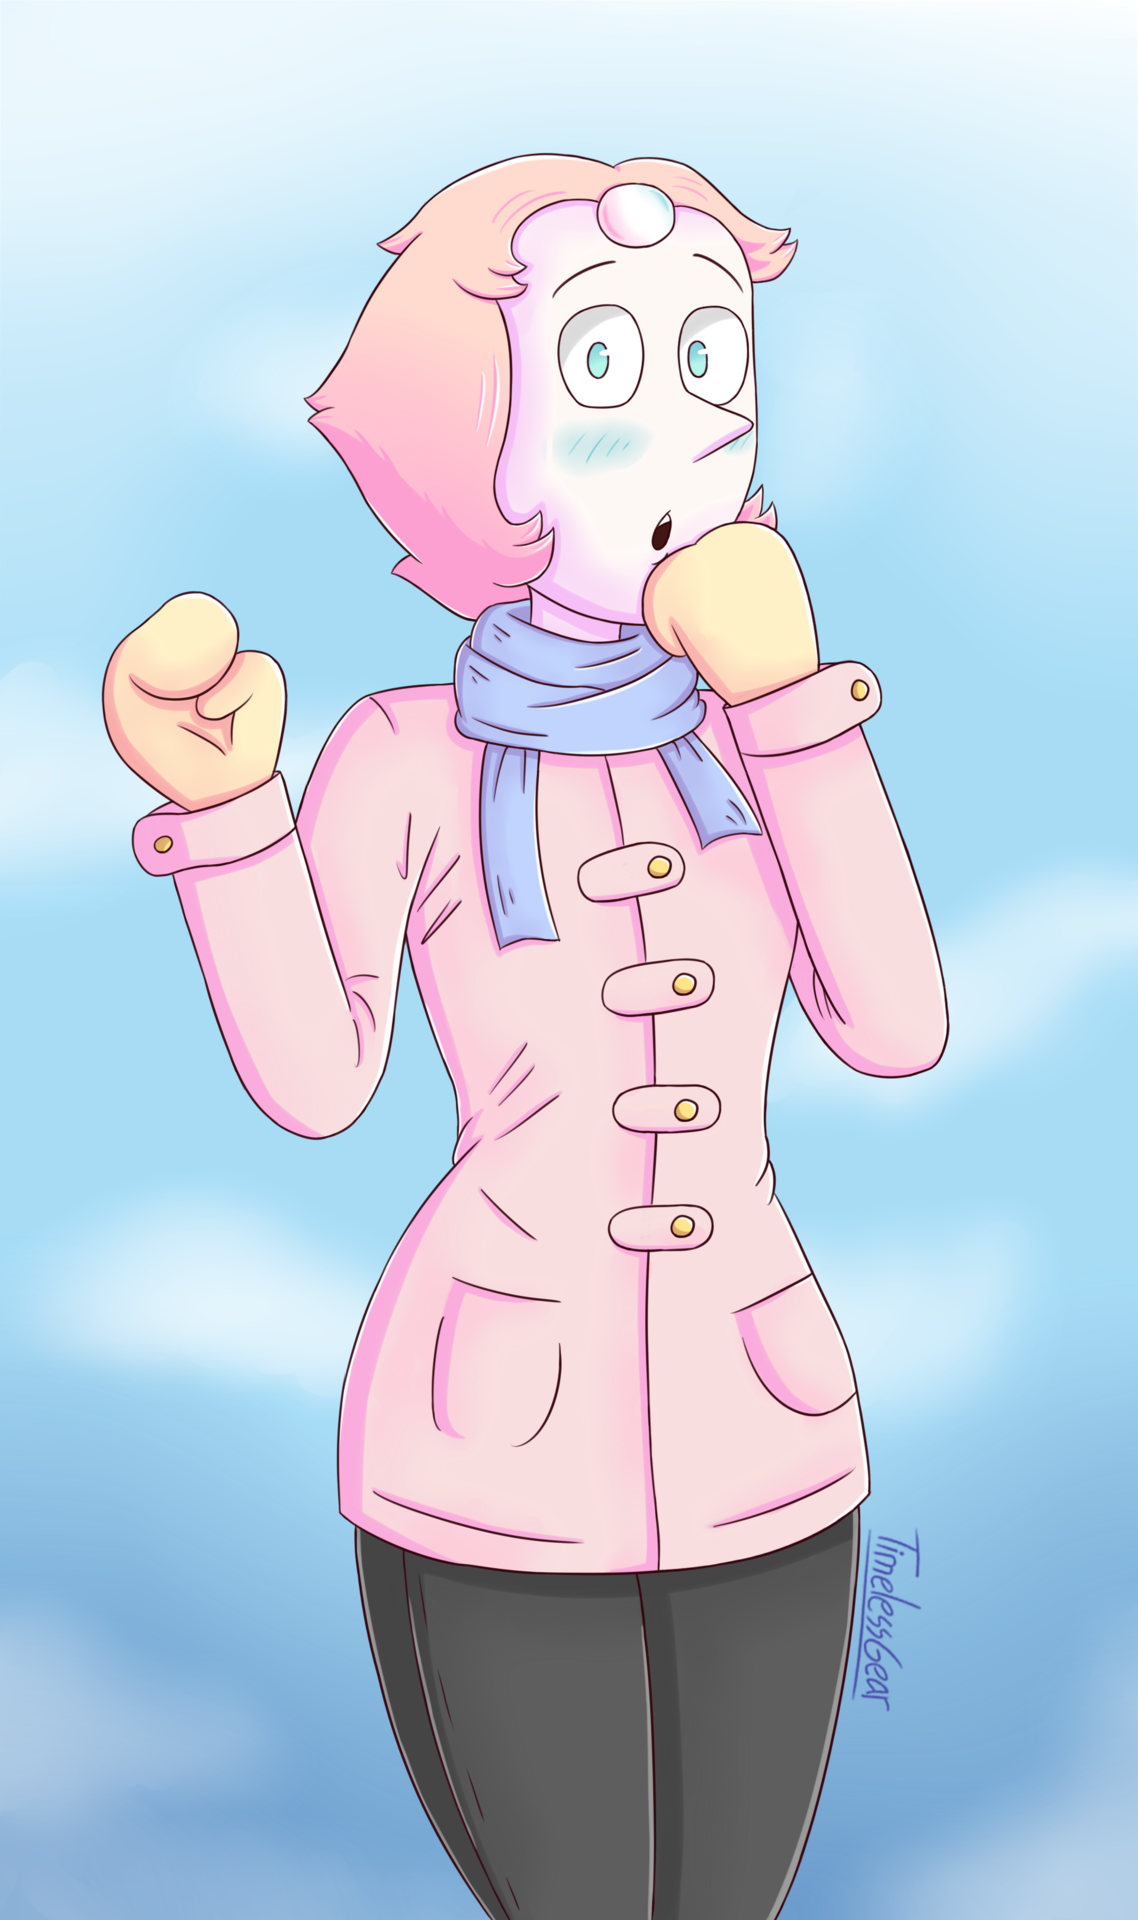 It’s been a while since the last time I did a Pearl pic, and I was starting to miss it. Here’s some winter pearl for all of you guys, especially those who are still in winter season.